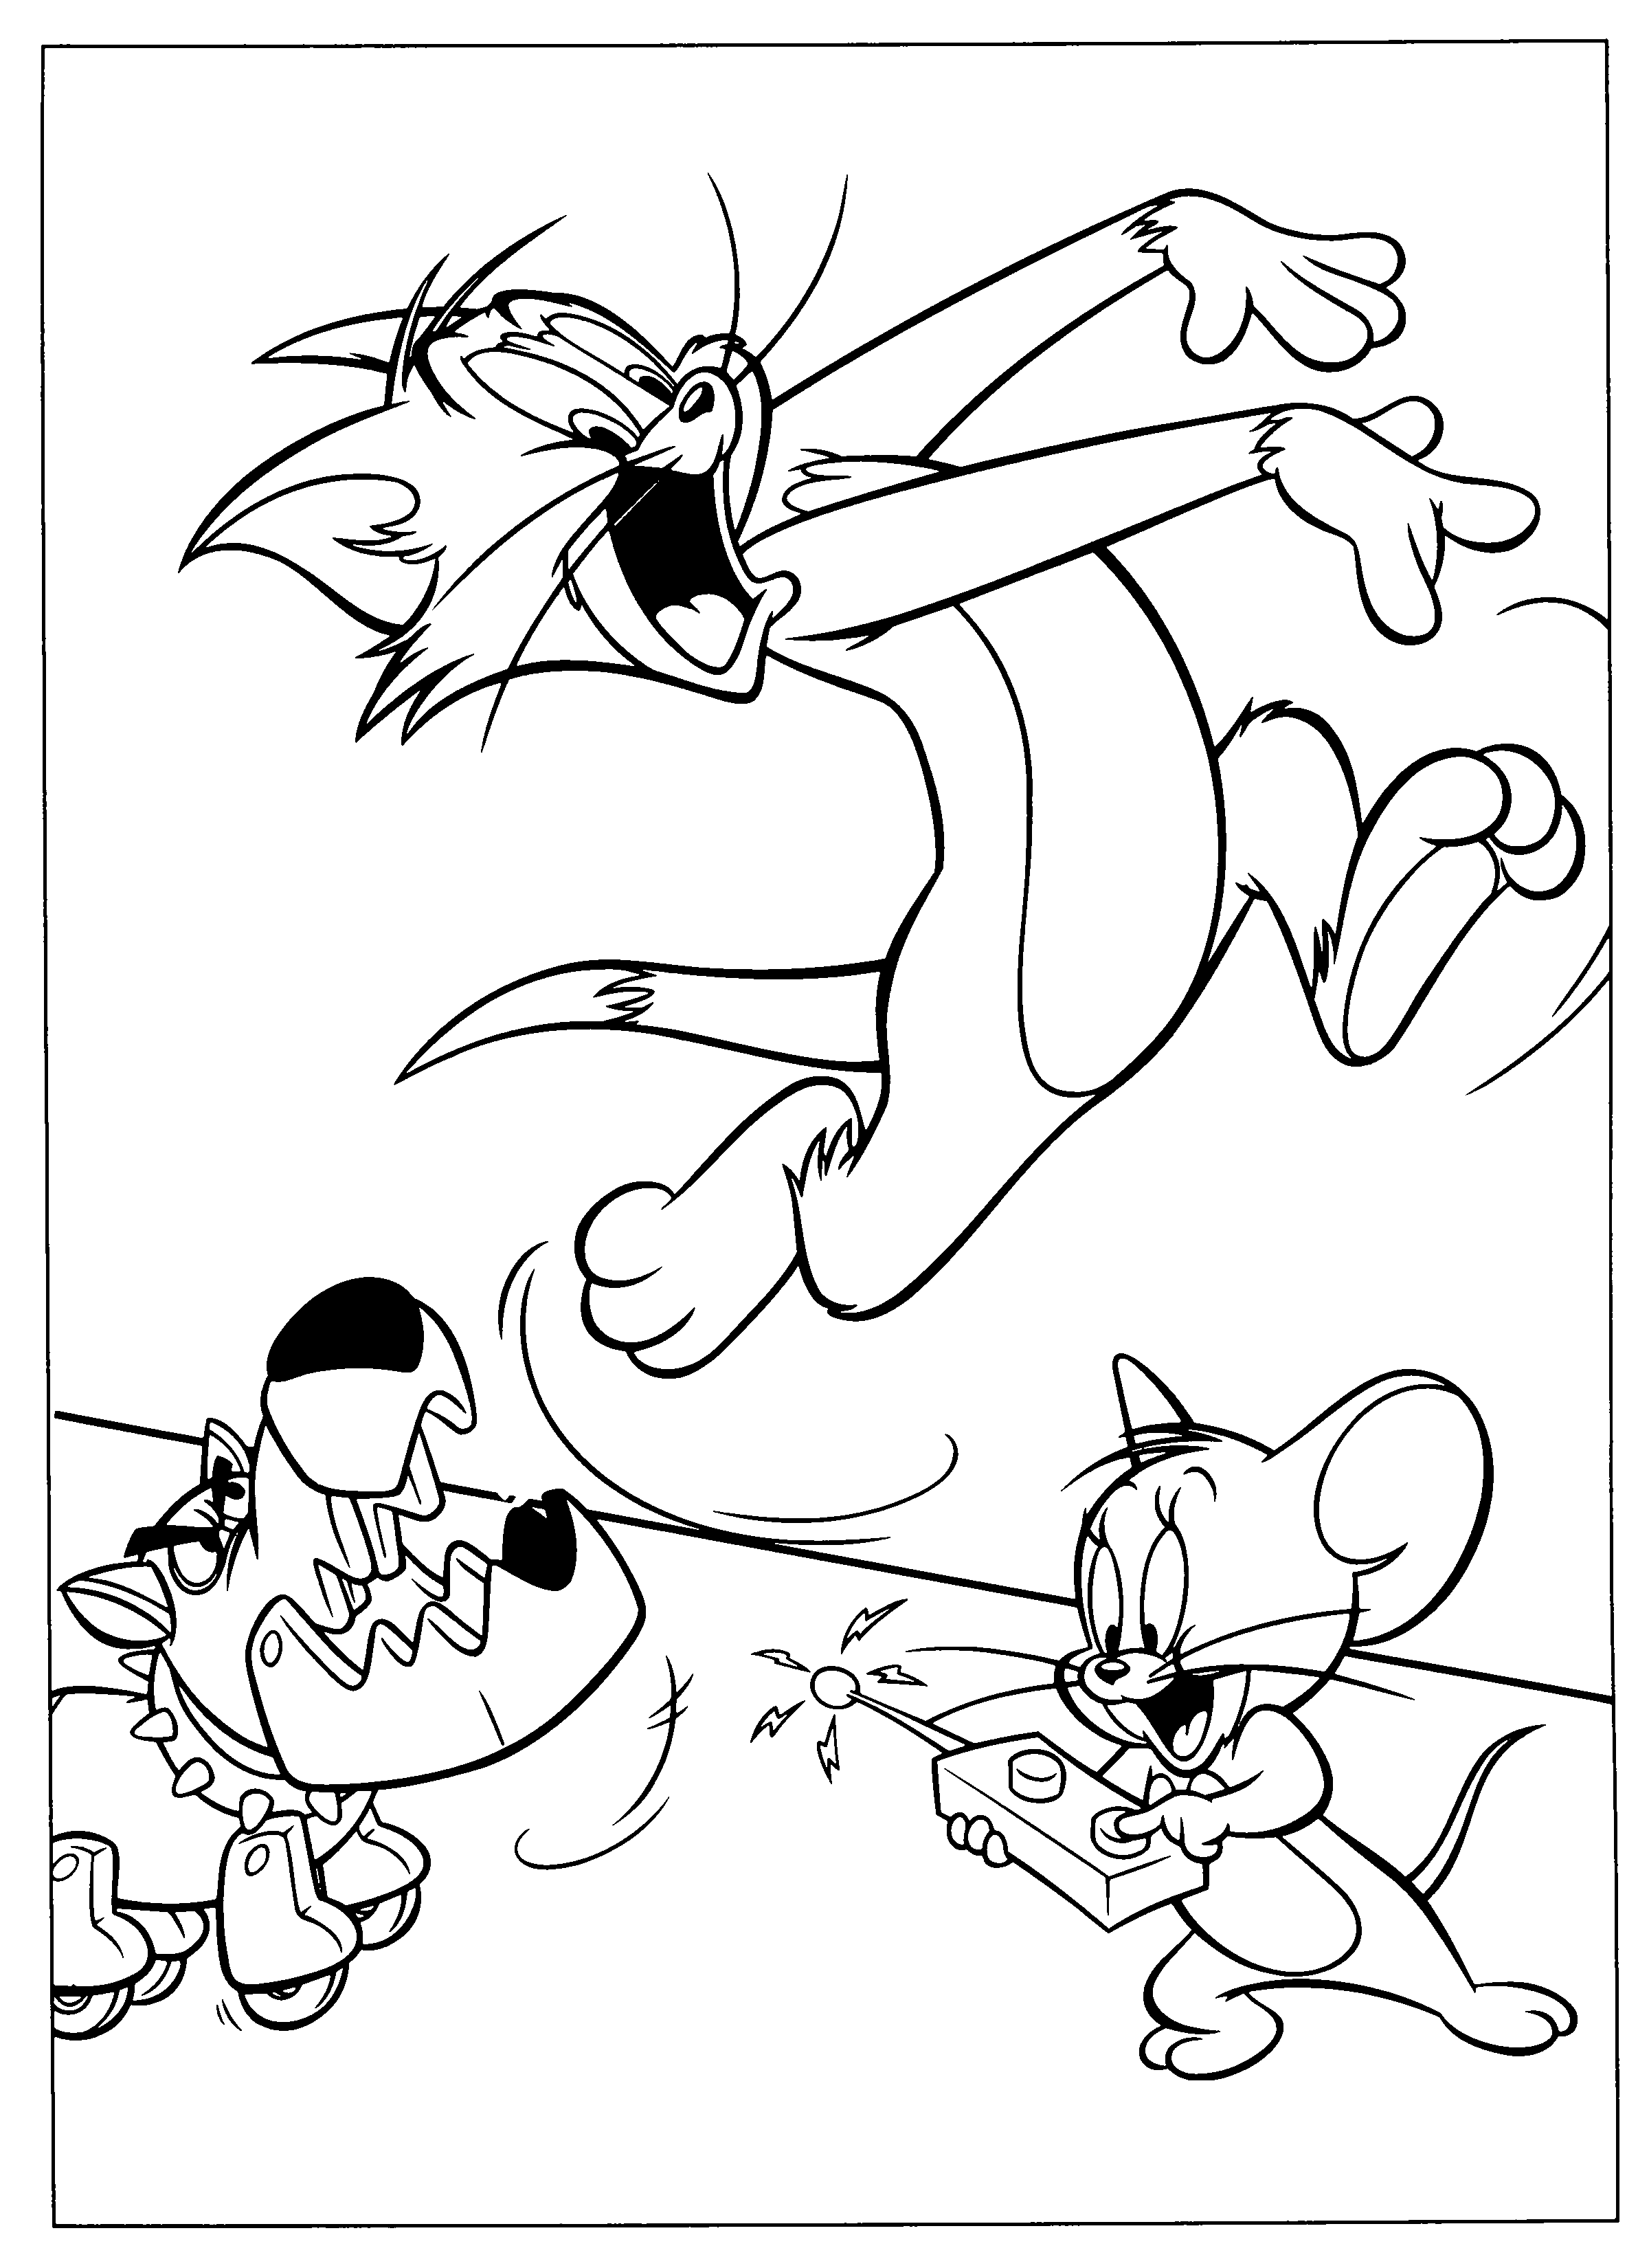 tom and jerry coloring page tom and jerry coloring pages download and print for free tom page jerry coloring and 